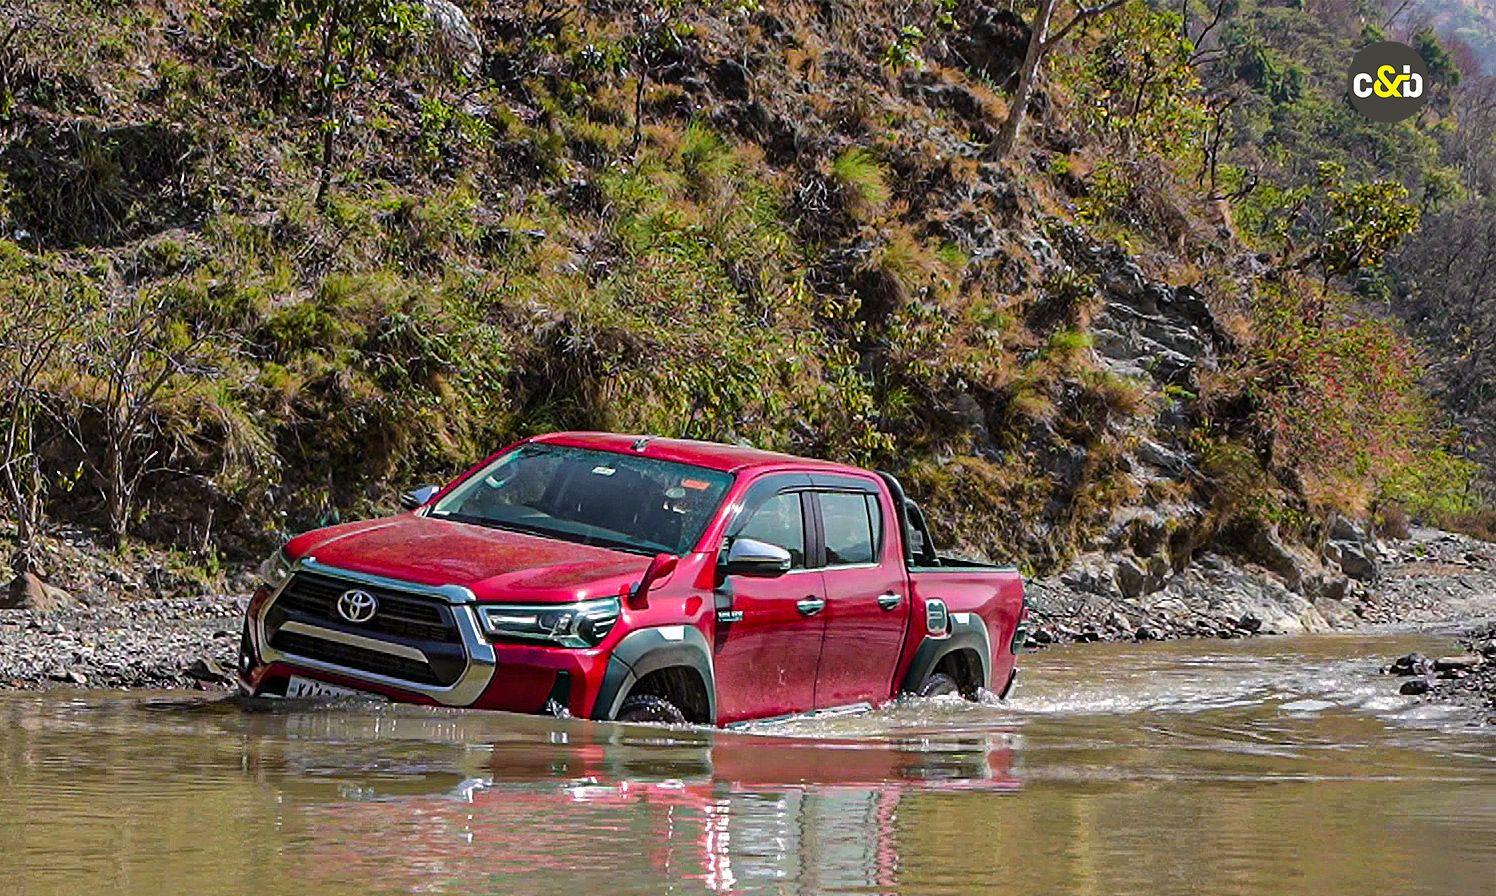 Review: Toyota Hilux - The Go Anywhere, Do Anything Vehicle